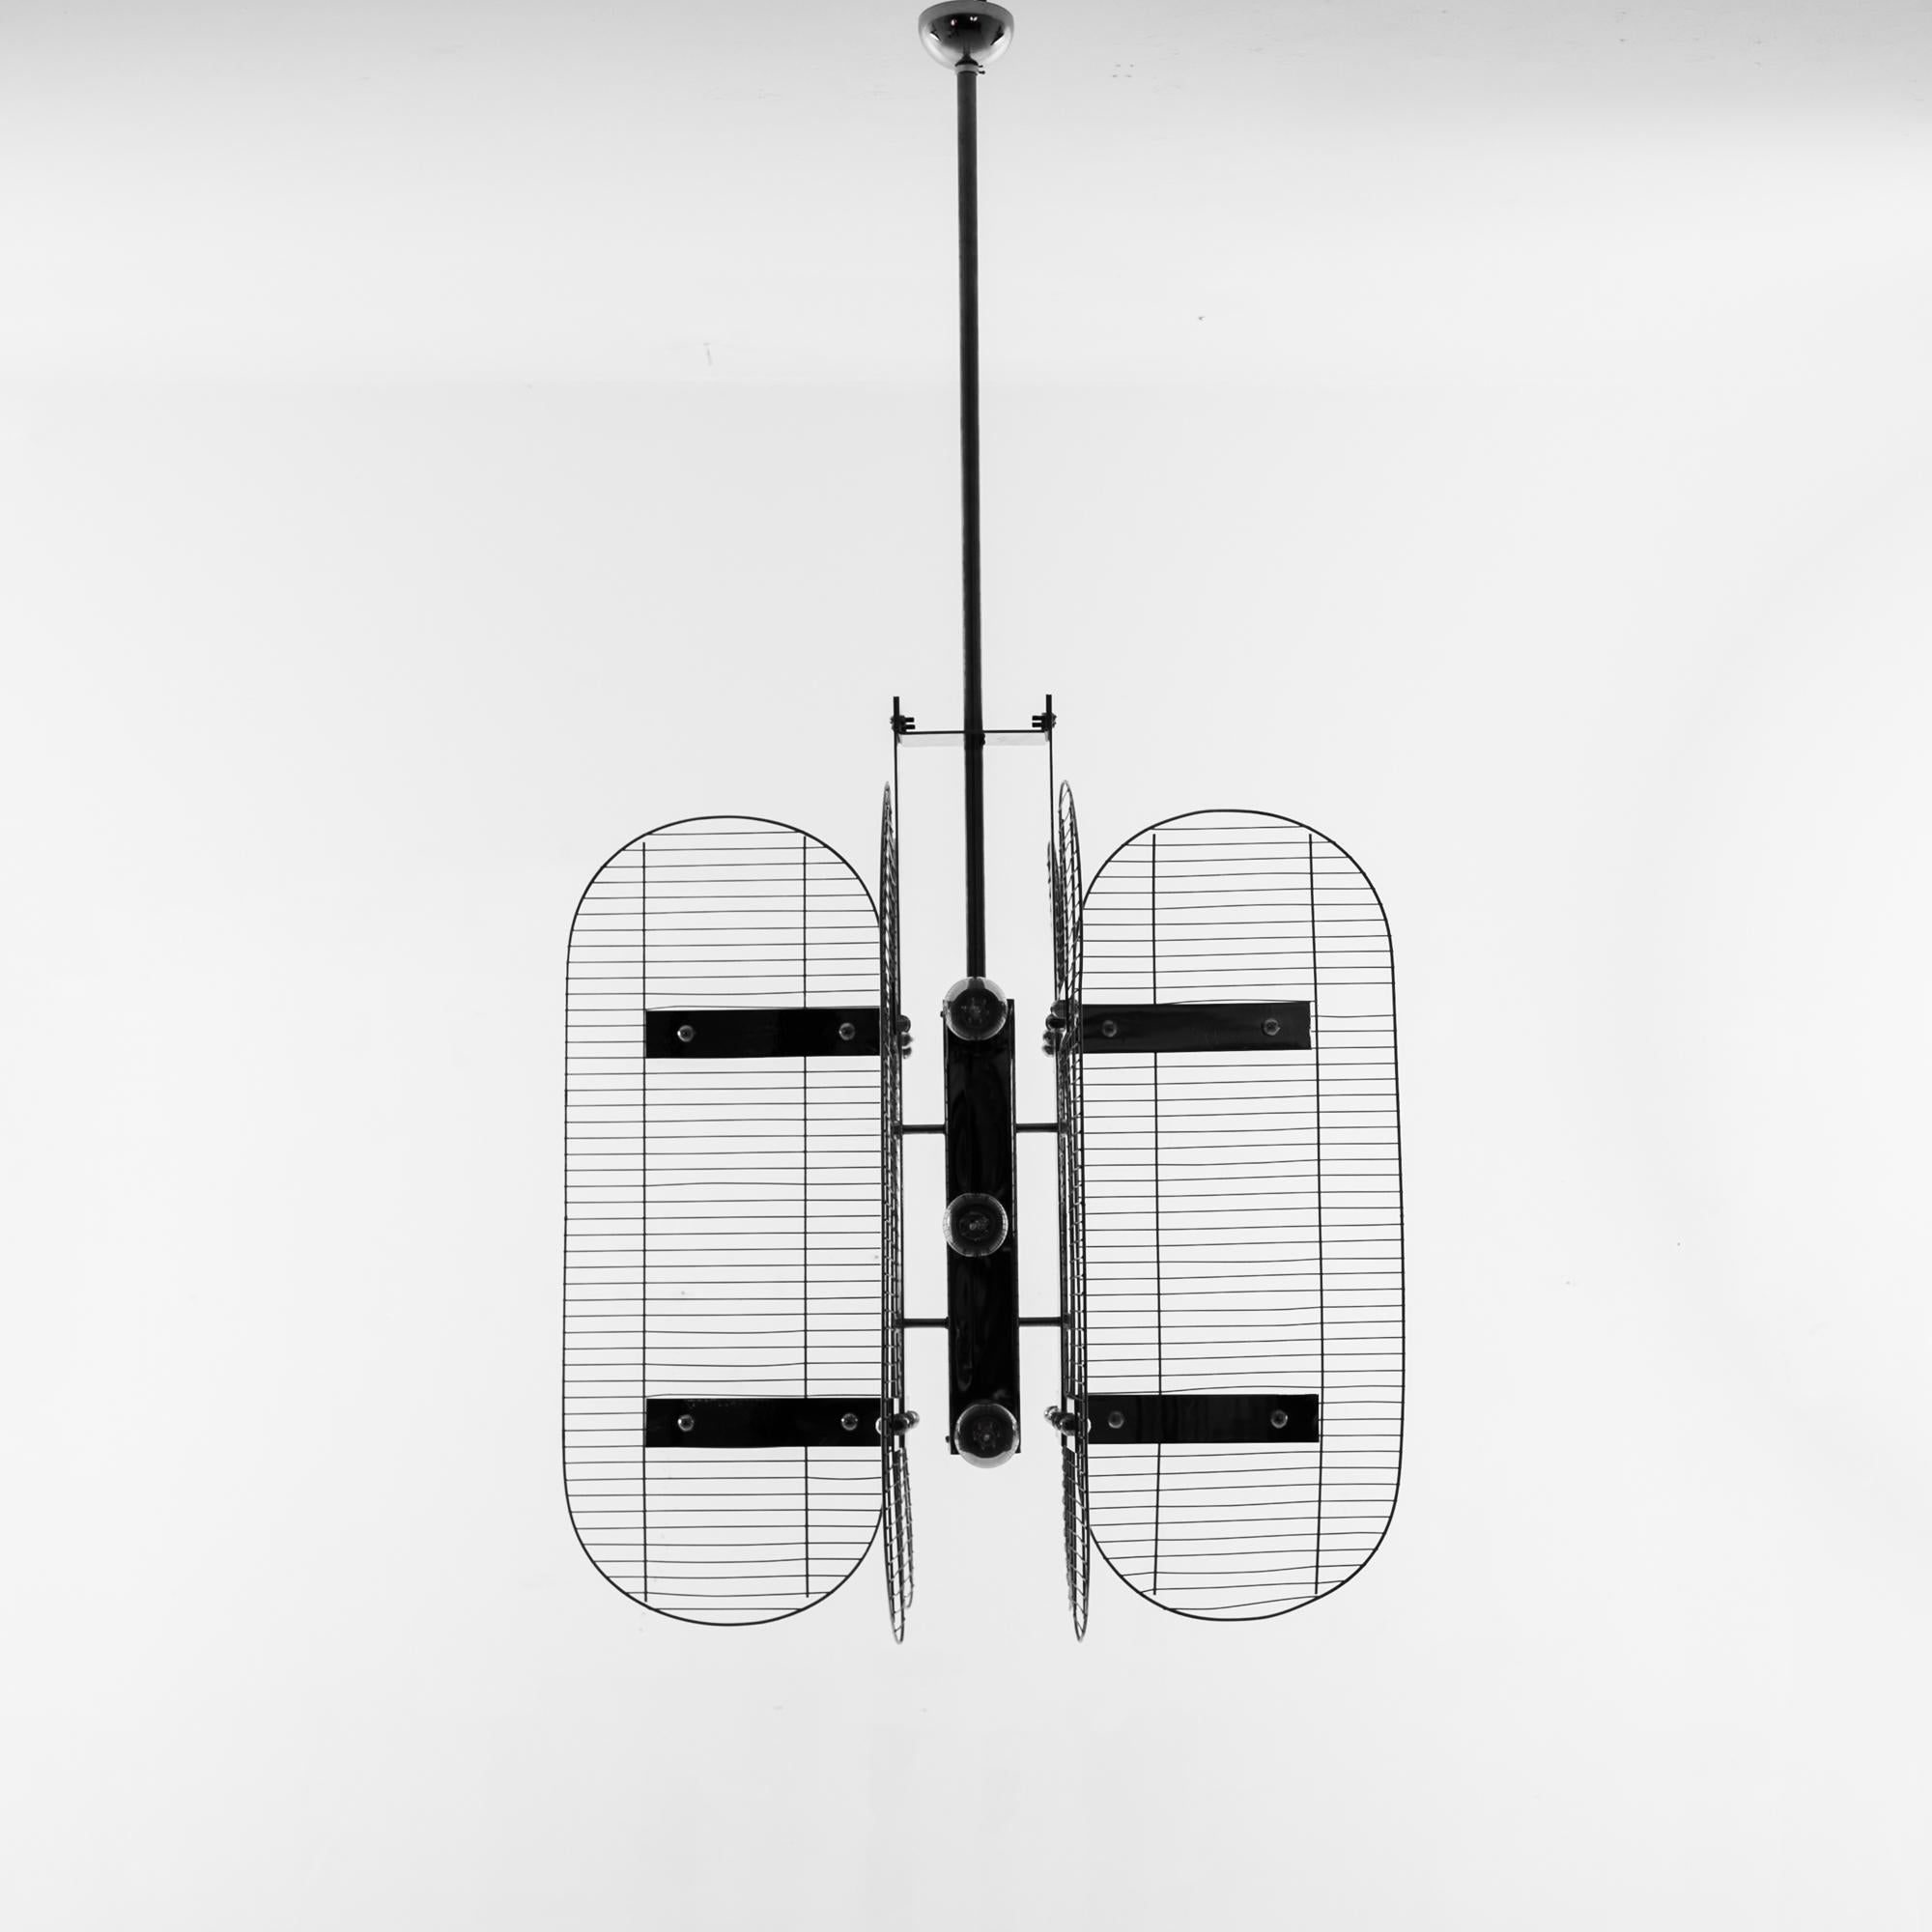 A metal chandelier from Czechia, produced circa 1960. This Mid-Century style pendant features of six lights, flanked by six metal grilles, mounted on a central stalk hanging from the ceiling. The unique geometric design is rendered in stark black